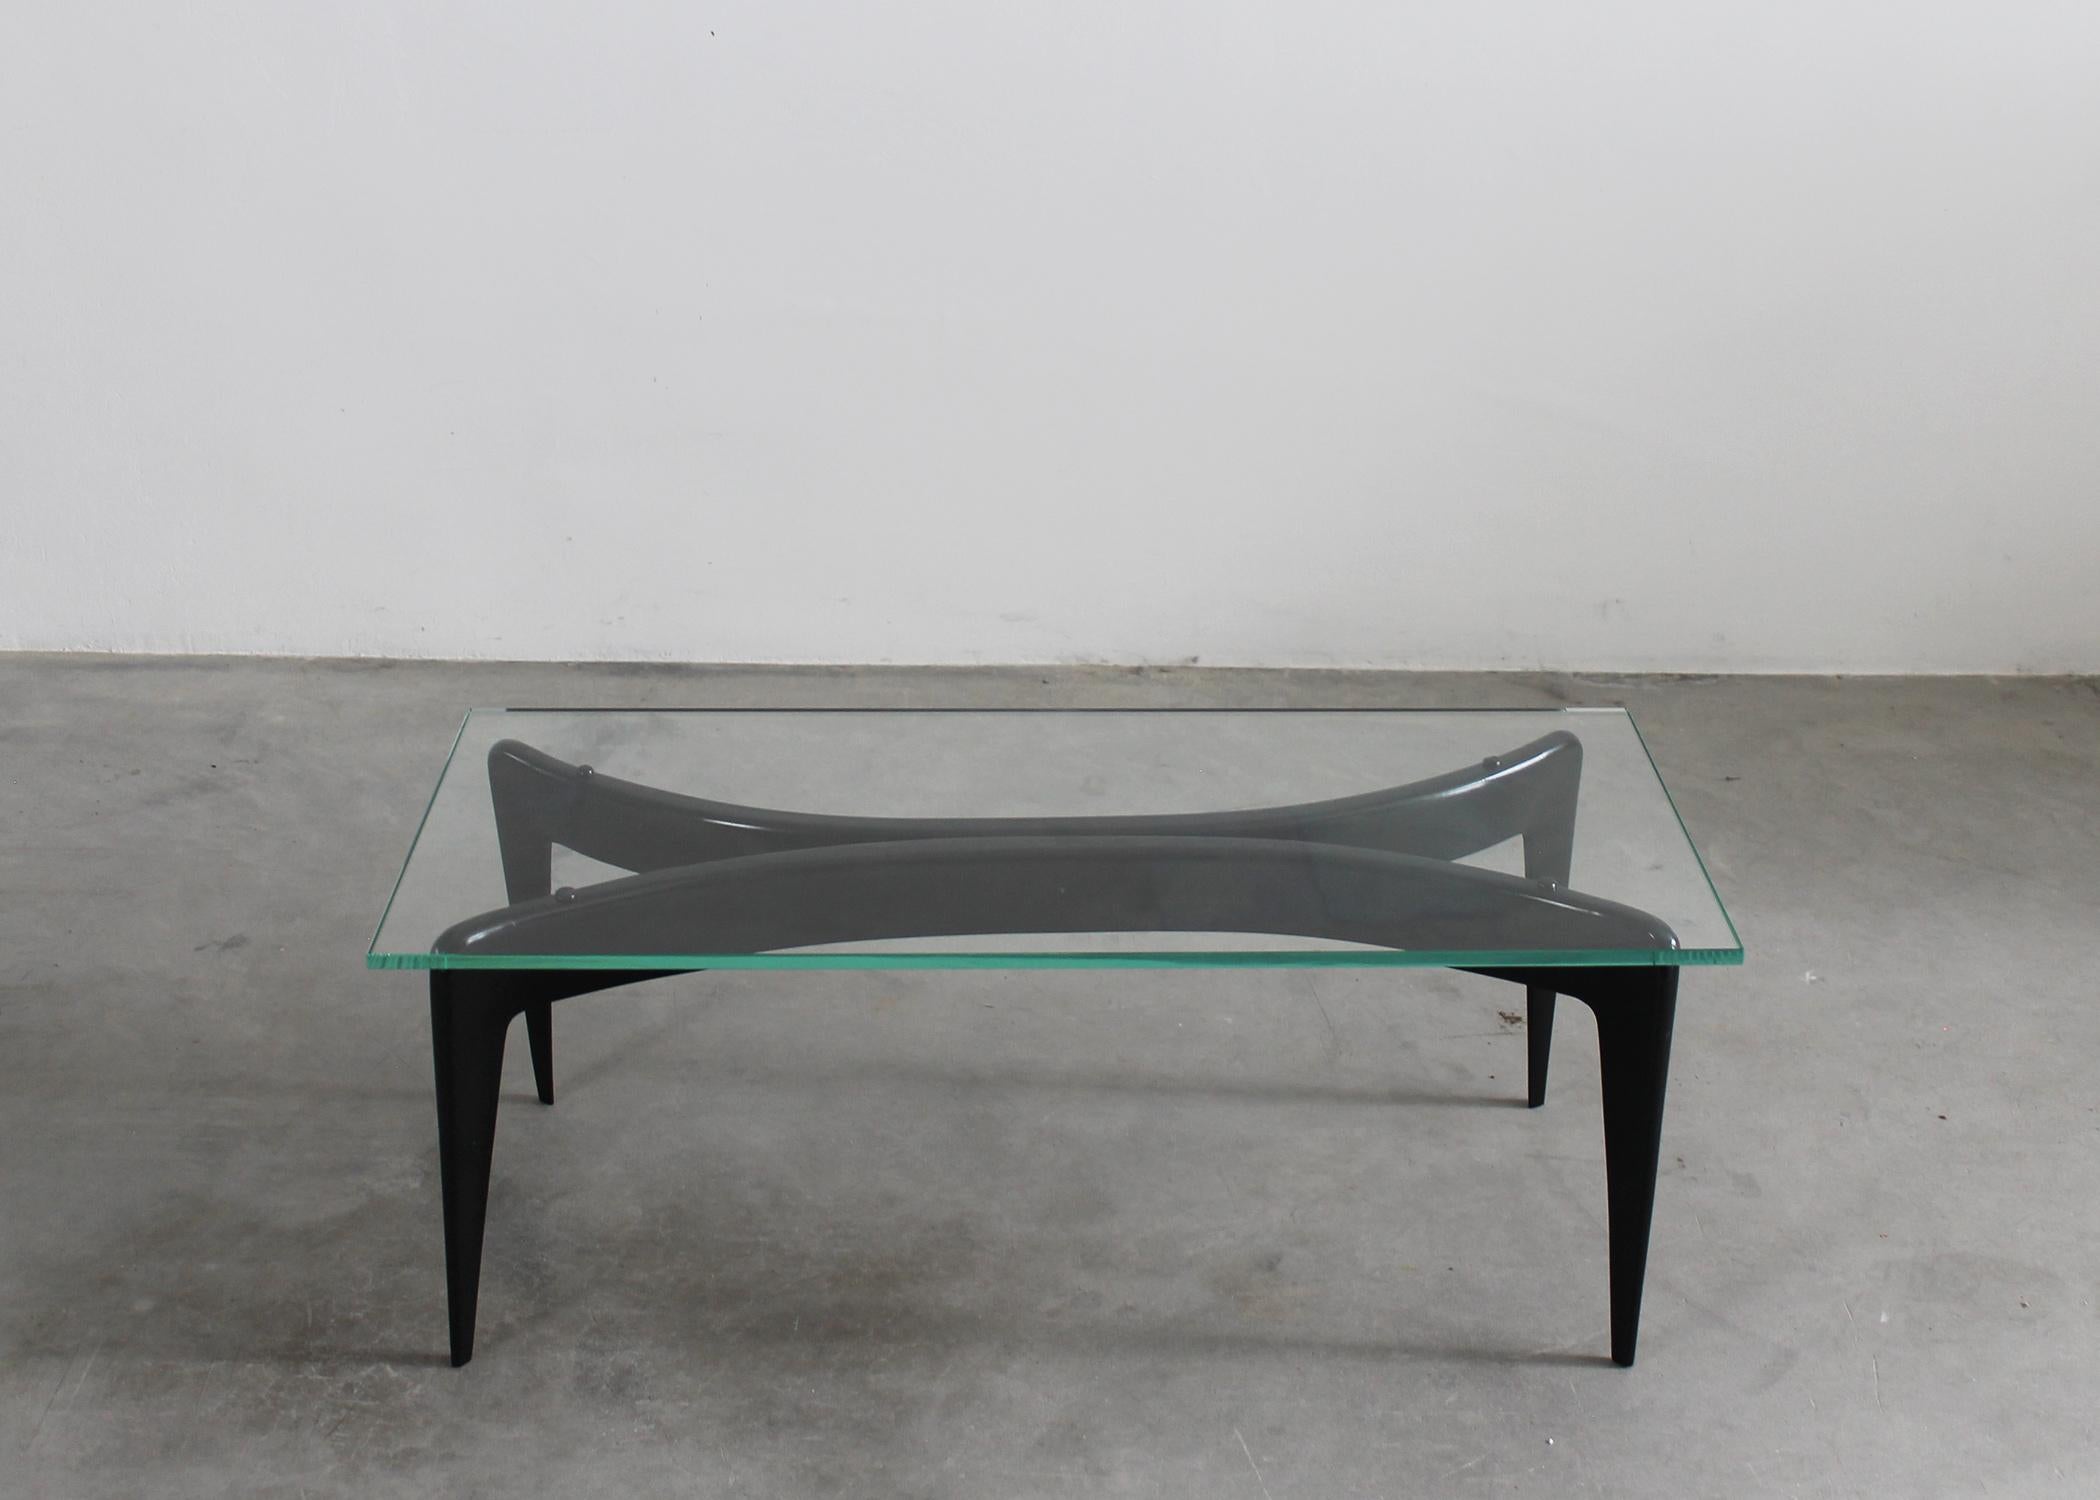 Lacquered Gio Ponti Rectangular Coffee Table in Wood and Glass by Fontana Arte 1940s Italy